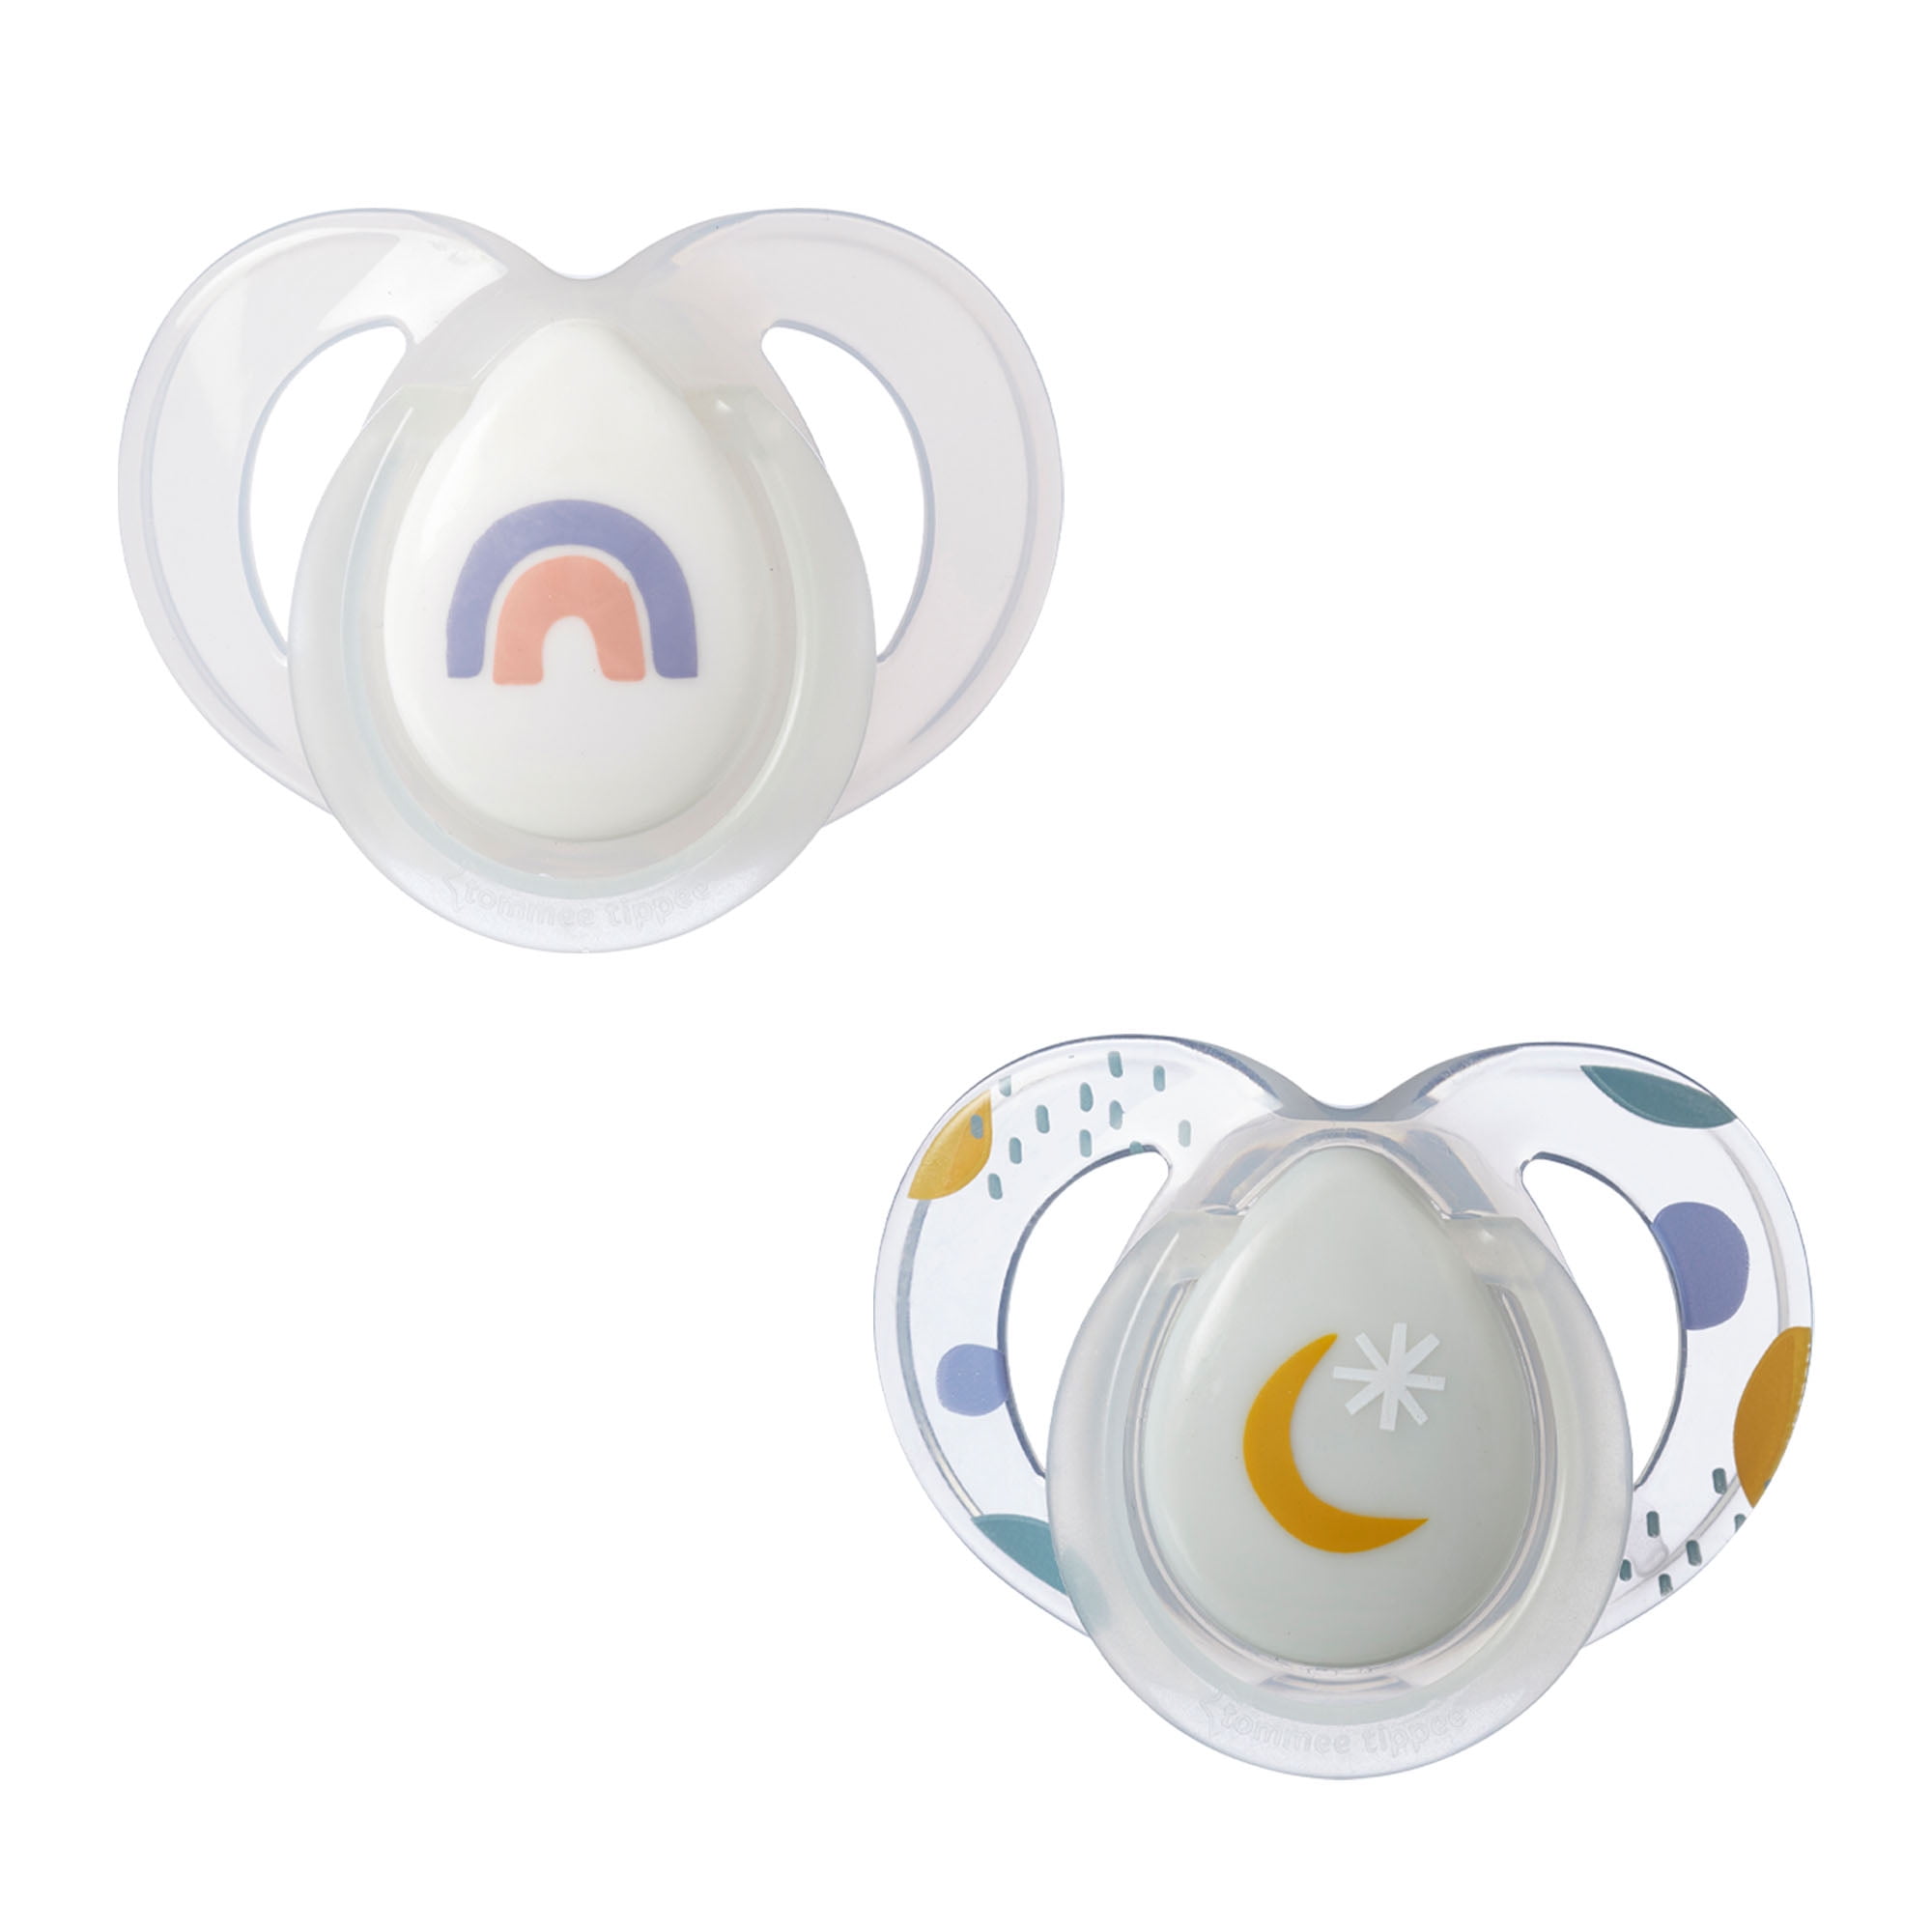 Tommee Tippee Day & Night Pacifiers Glow-In-The-Dark BPA-free 18-36 Months  (2)